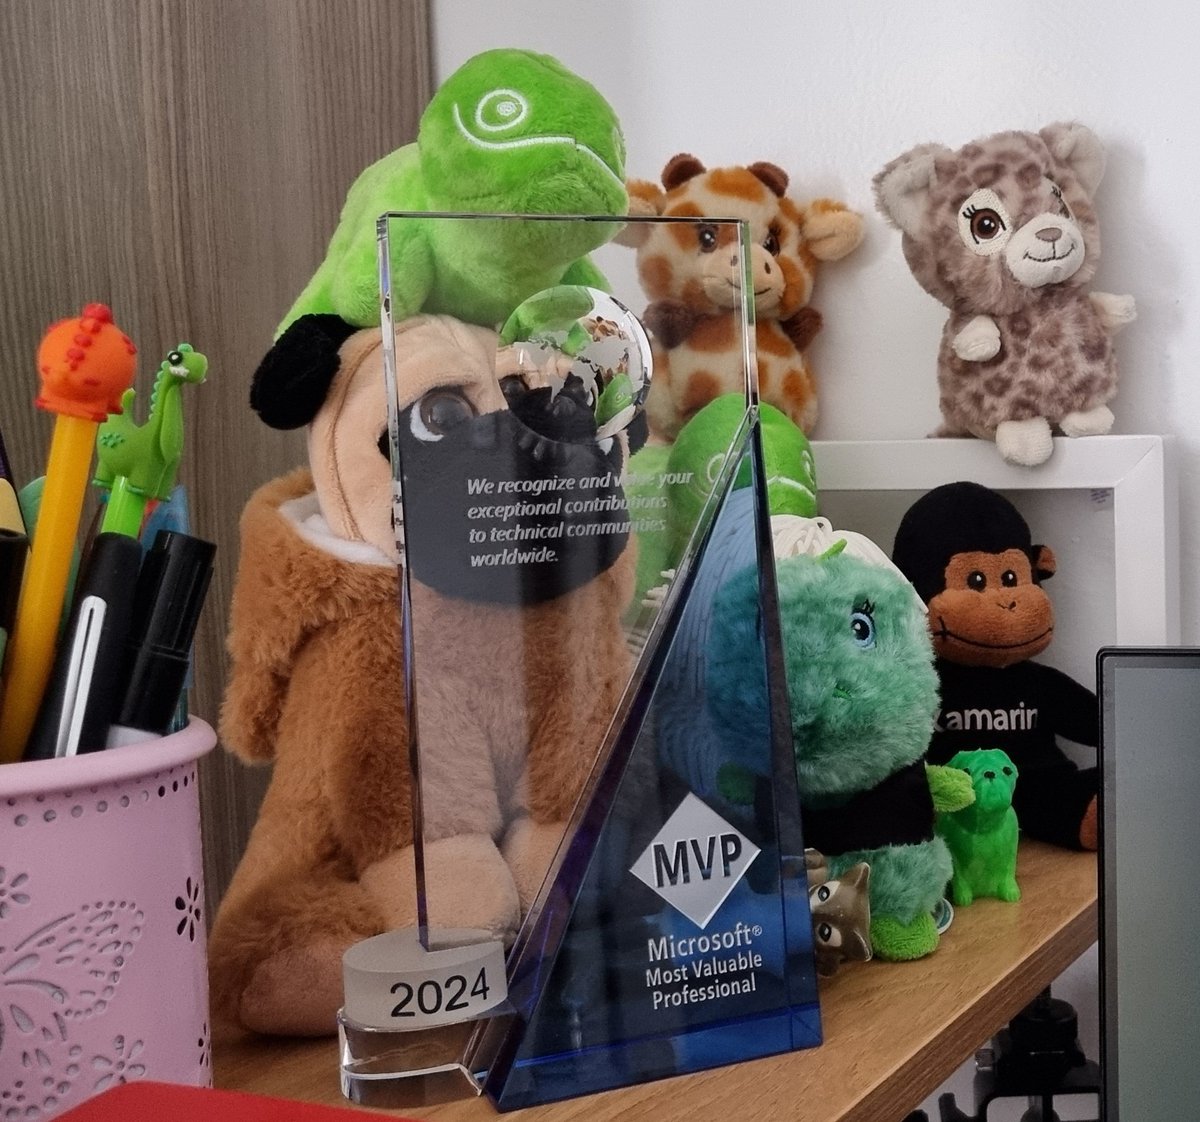 Guess what just arrived!!! 🥳 🥳 😎😎😎

My #MVP crystal award 🔮🩶 Whoop Whoop 🥳 #MVPBuzz @MVPAward

My #mascots are loving the new shiny item 🌟🌟🌟

Thank you so much!! #grateful